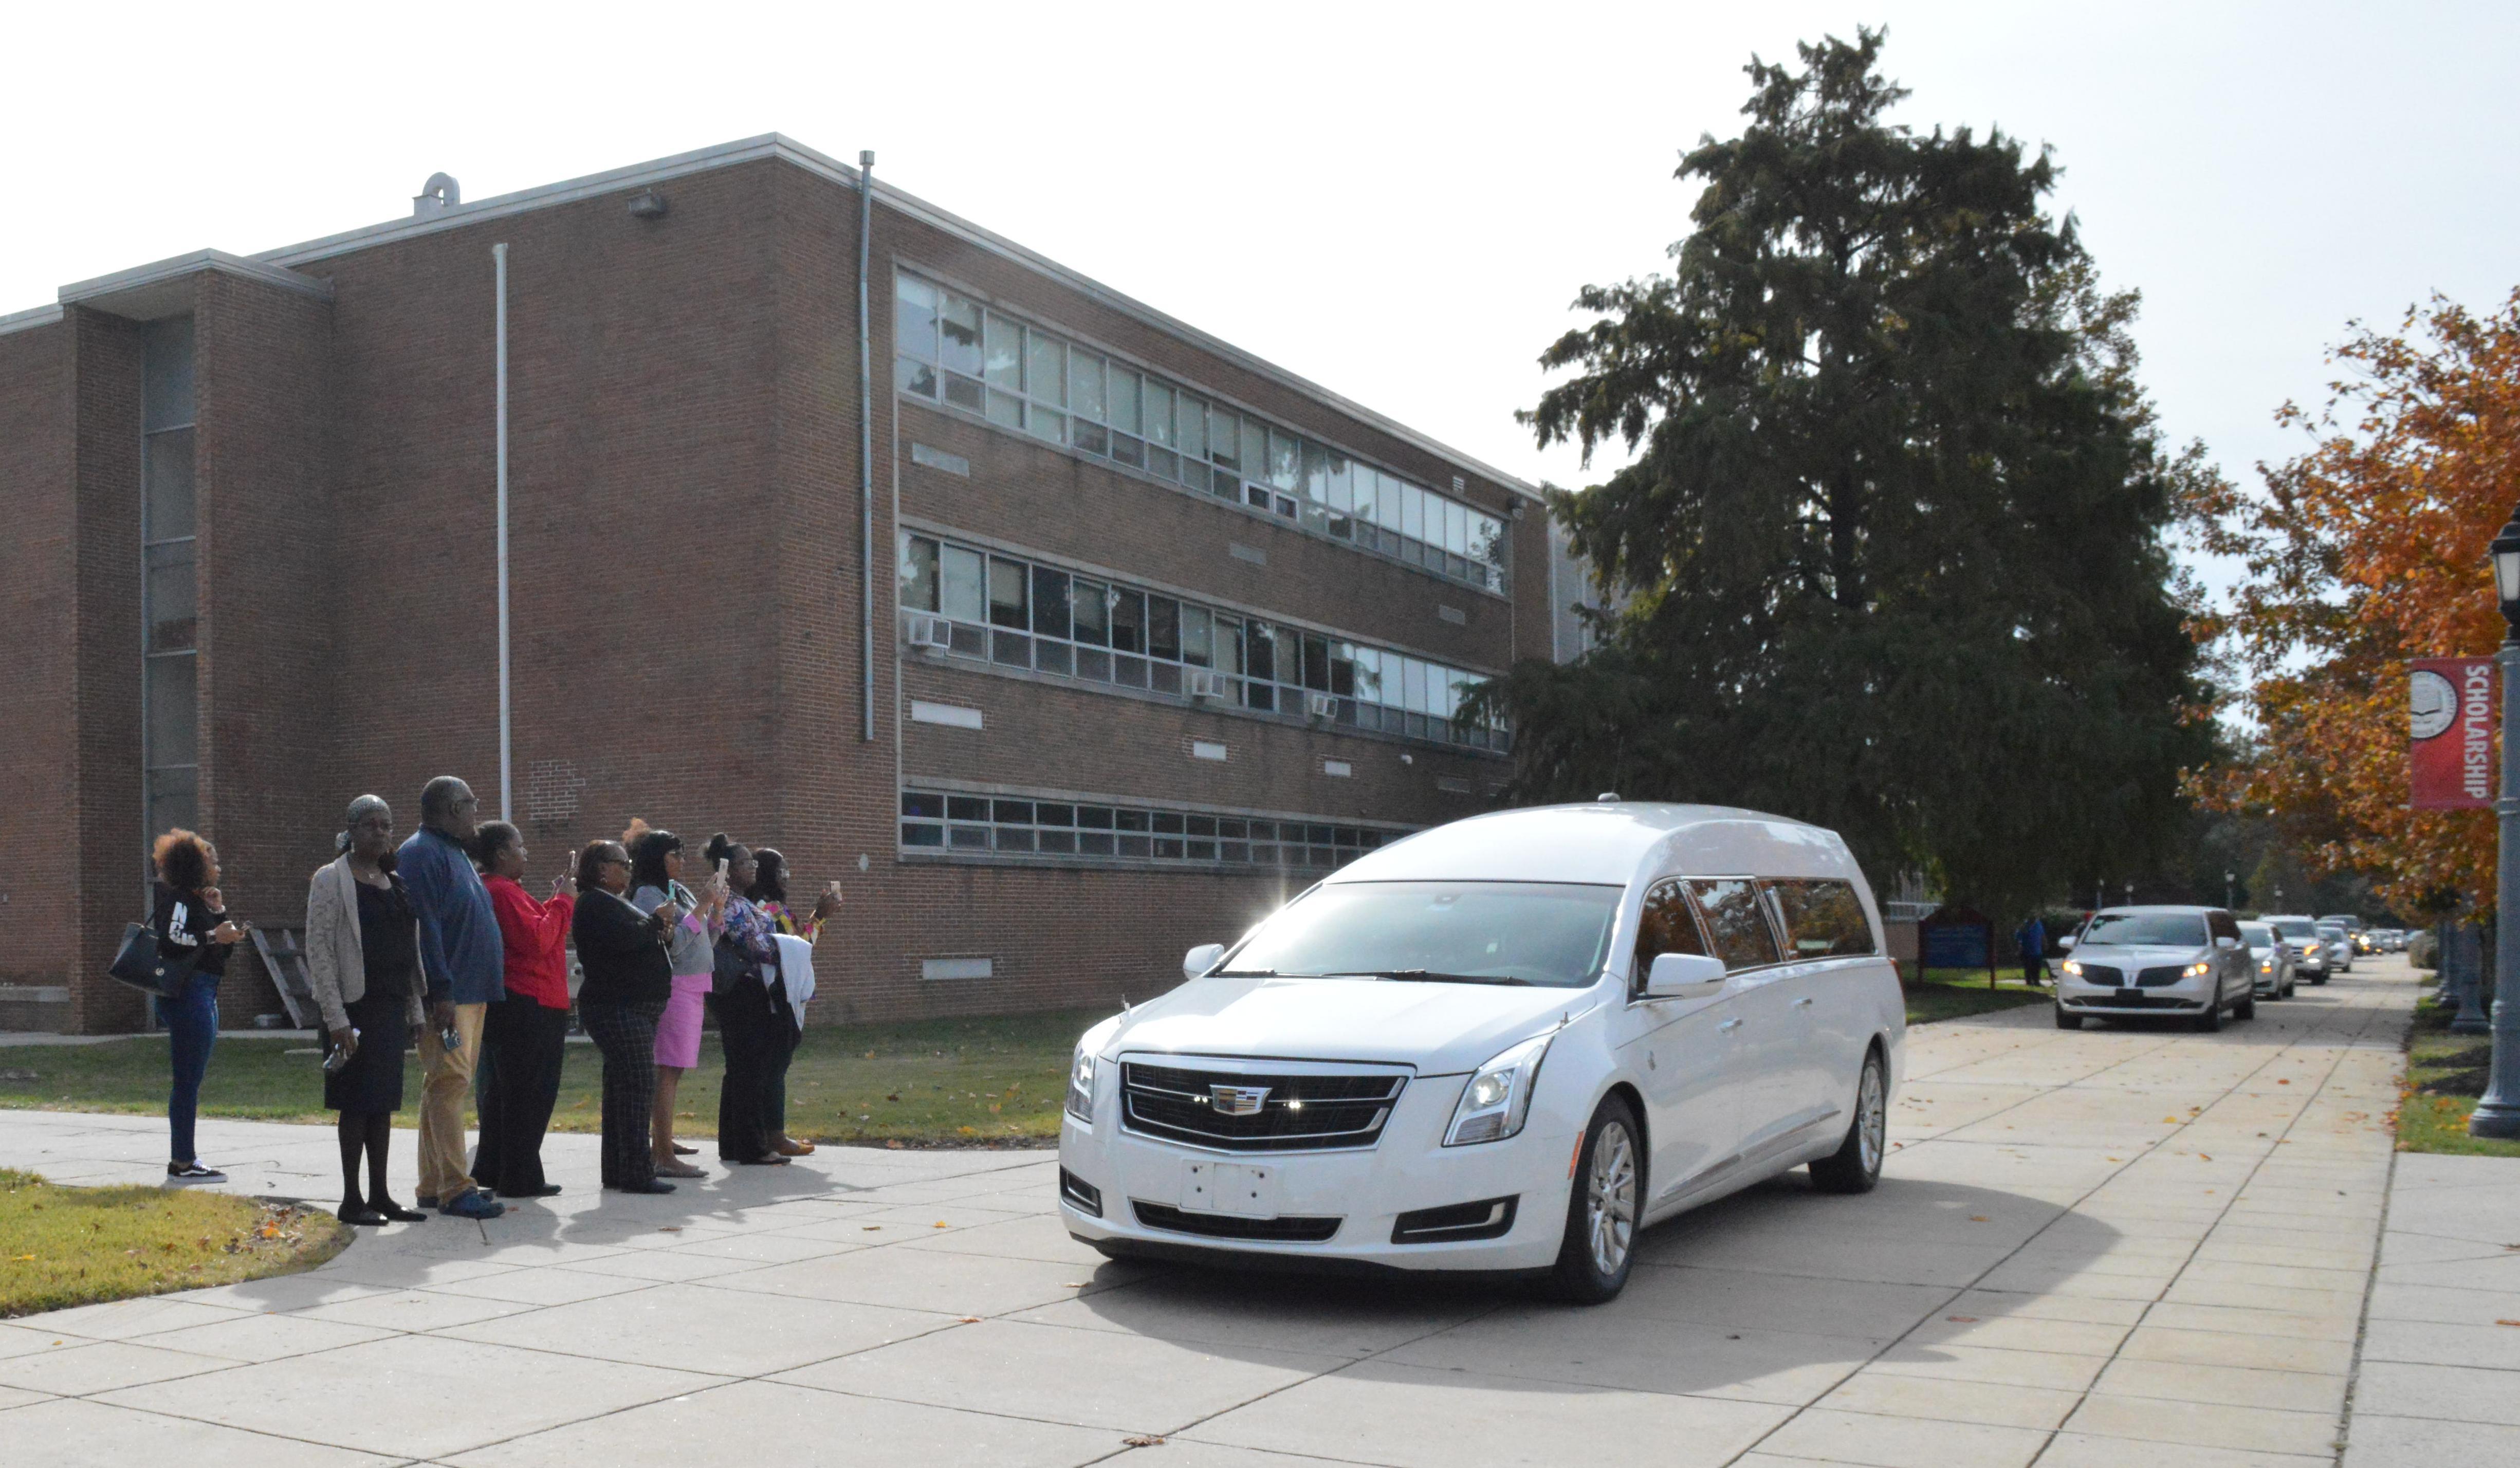 The hearse carrying the body of Dr. Ulysses S. Washington take the former longtime head of the Department of Agriculture and Natural Resource a final trip through the campus after the Celebration of Life service held in the Education and Humanities Theatre. Photo by Bernard Carr.